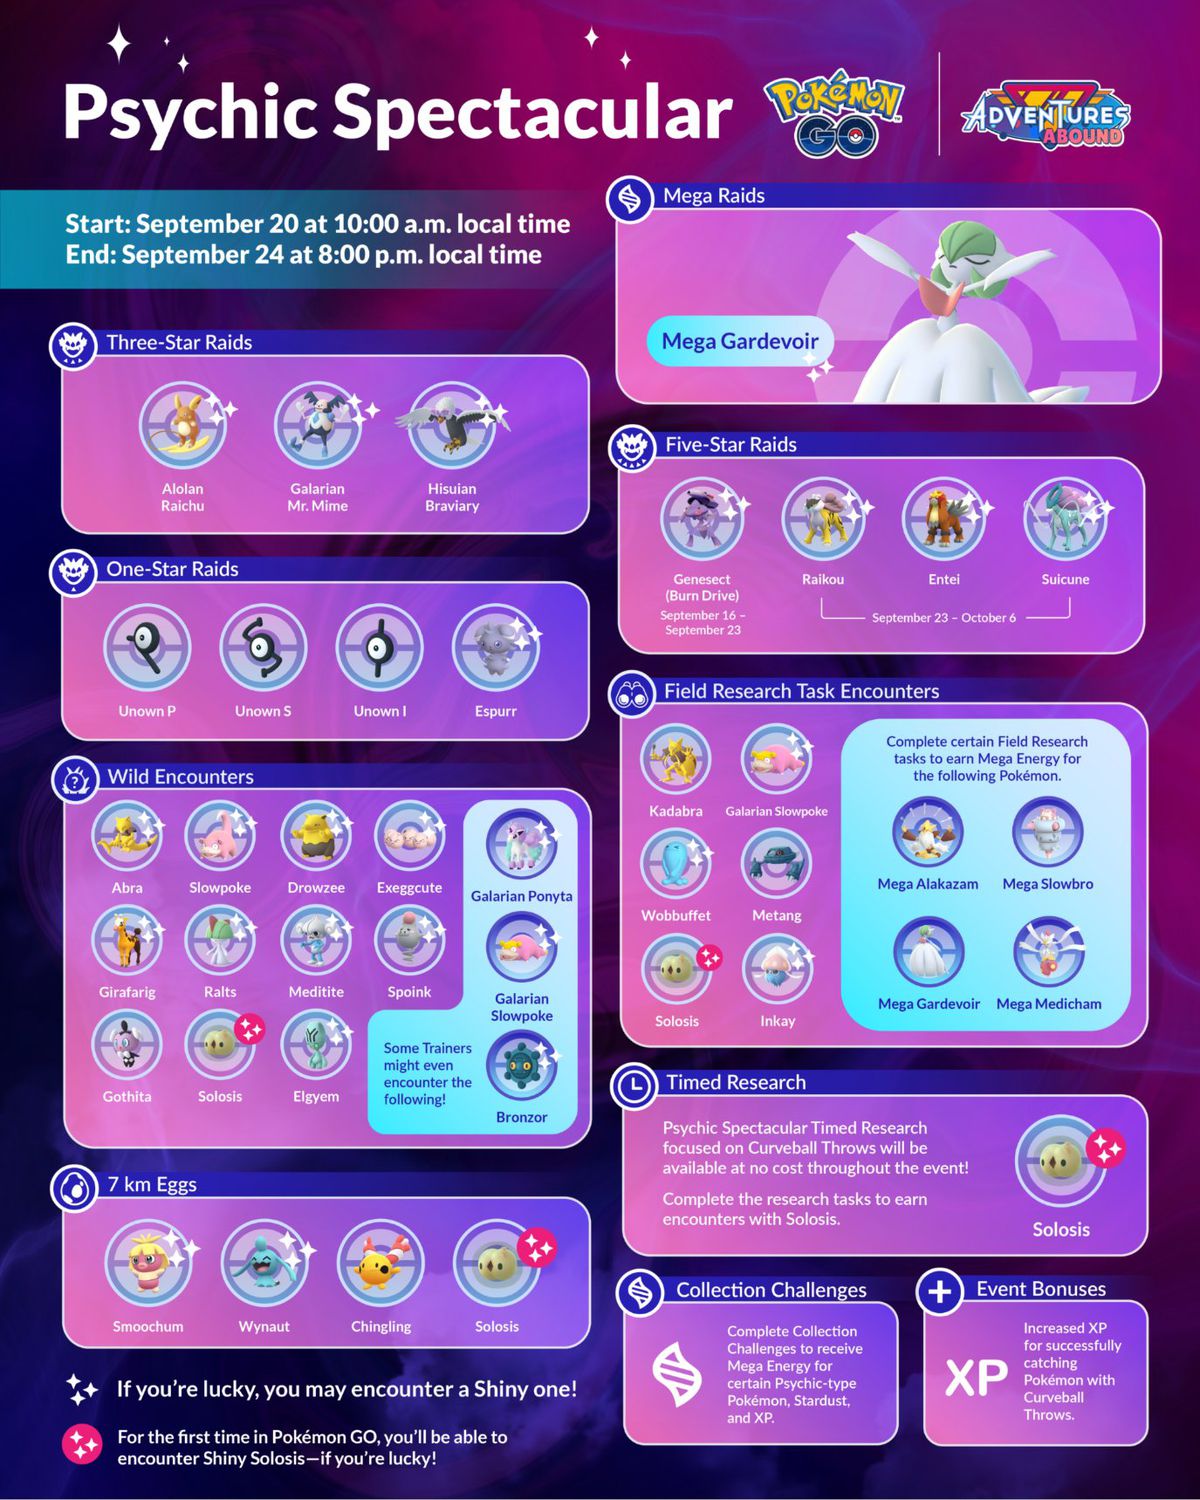 An infographic for the 2023 Psychic Spectacular event in Pokémon Go.